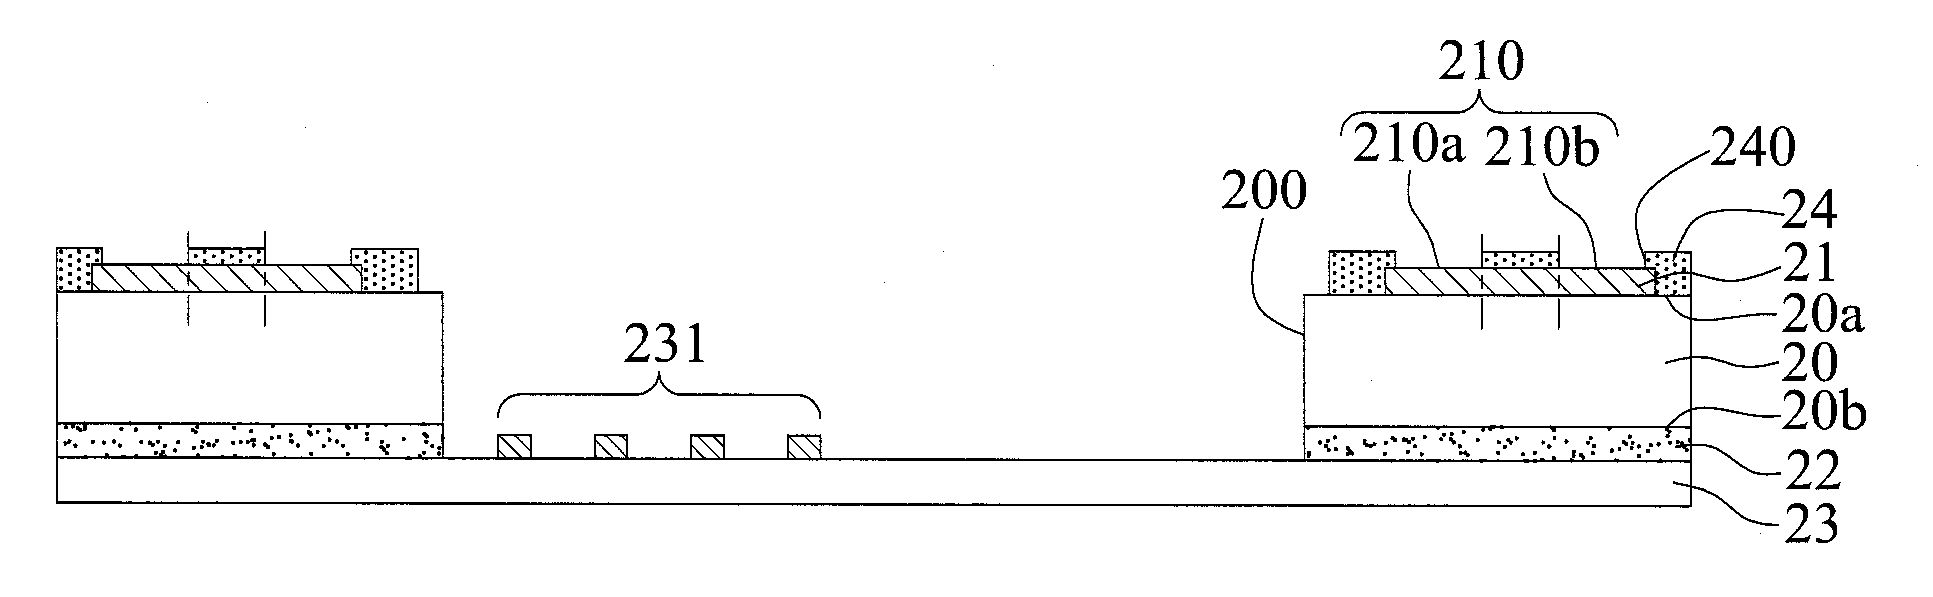 Microelectromechanical system (MEMS) carrier and method of fabricating the same